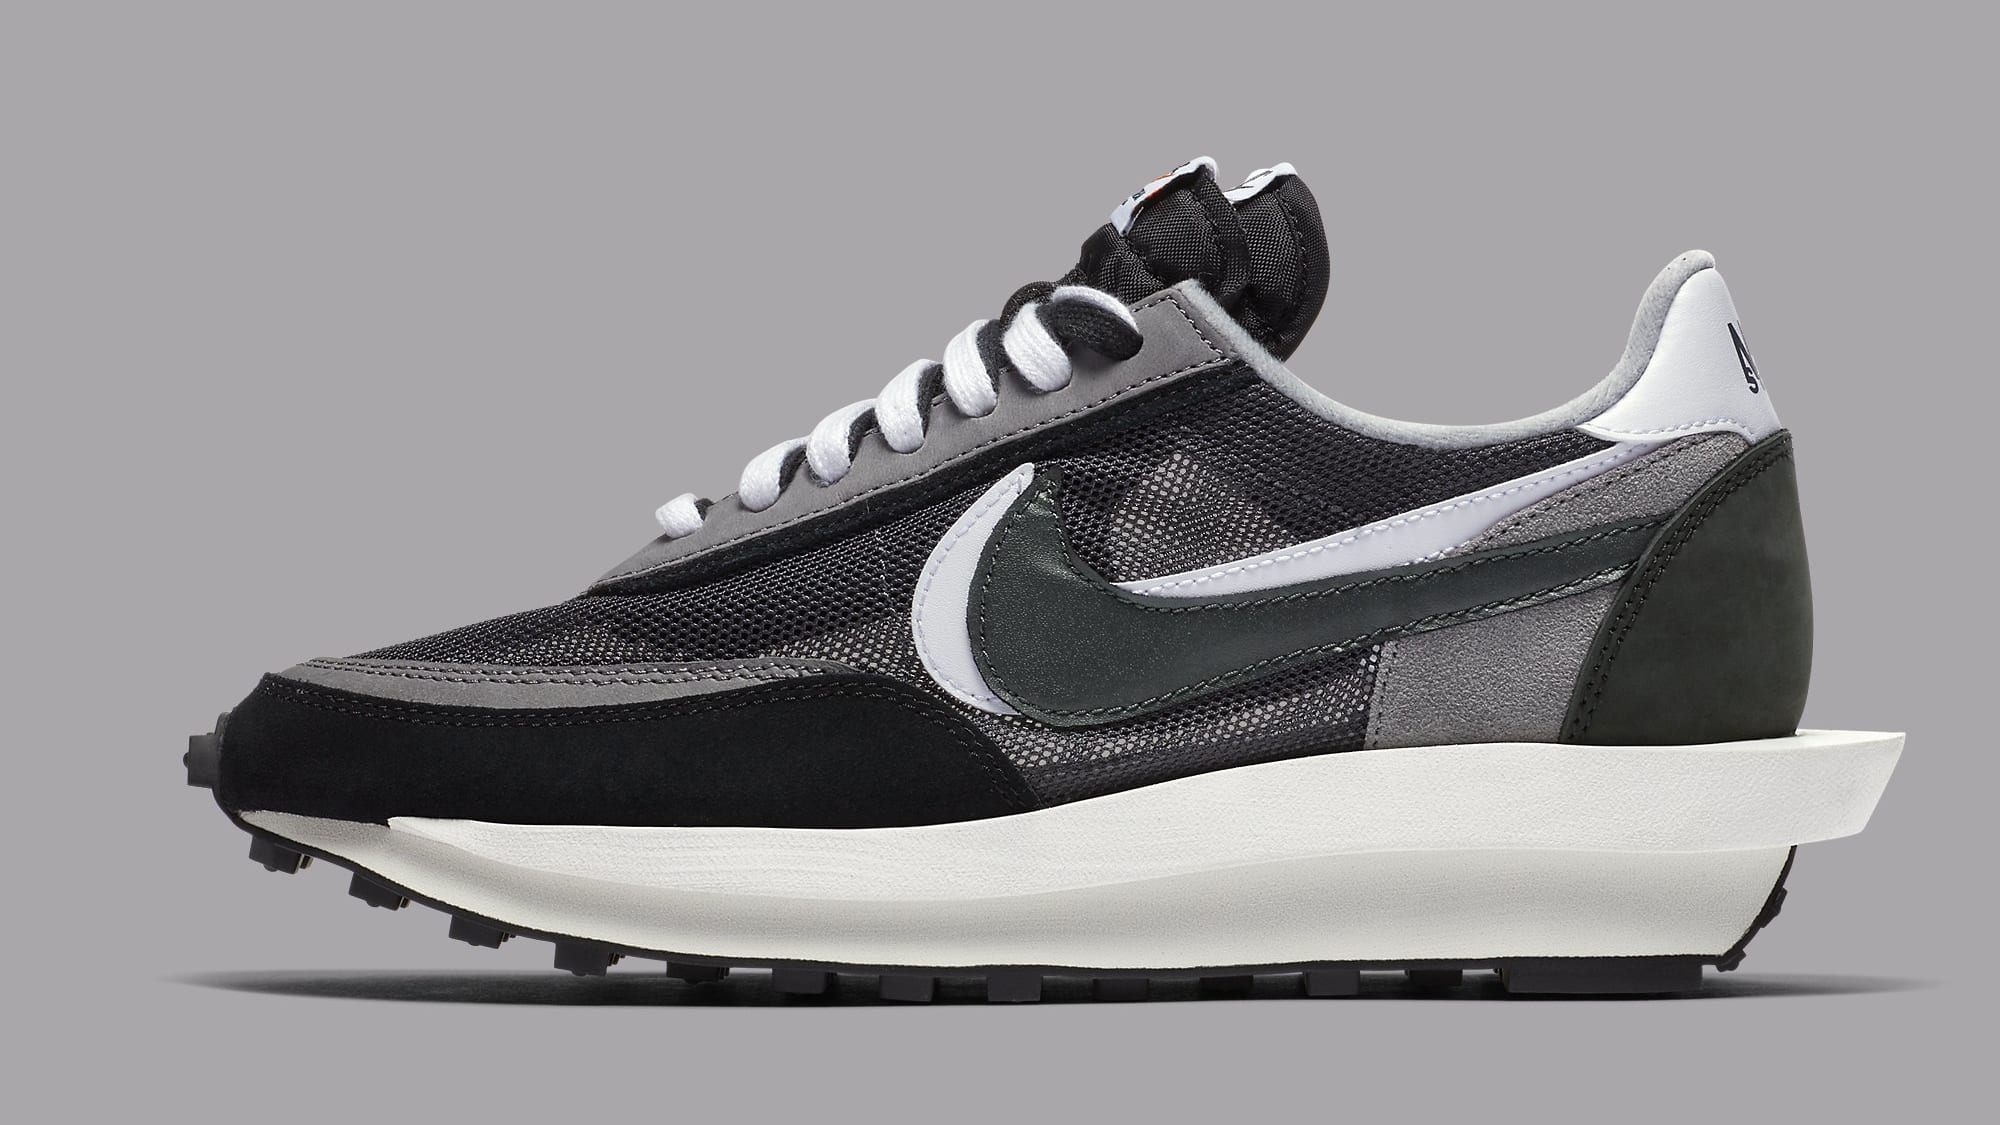 Sacai x Nike LDWaffle Black Anthracite Release Date BV0073-001 Profile